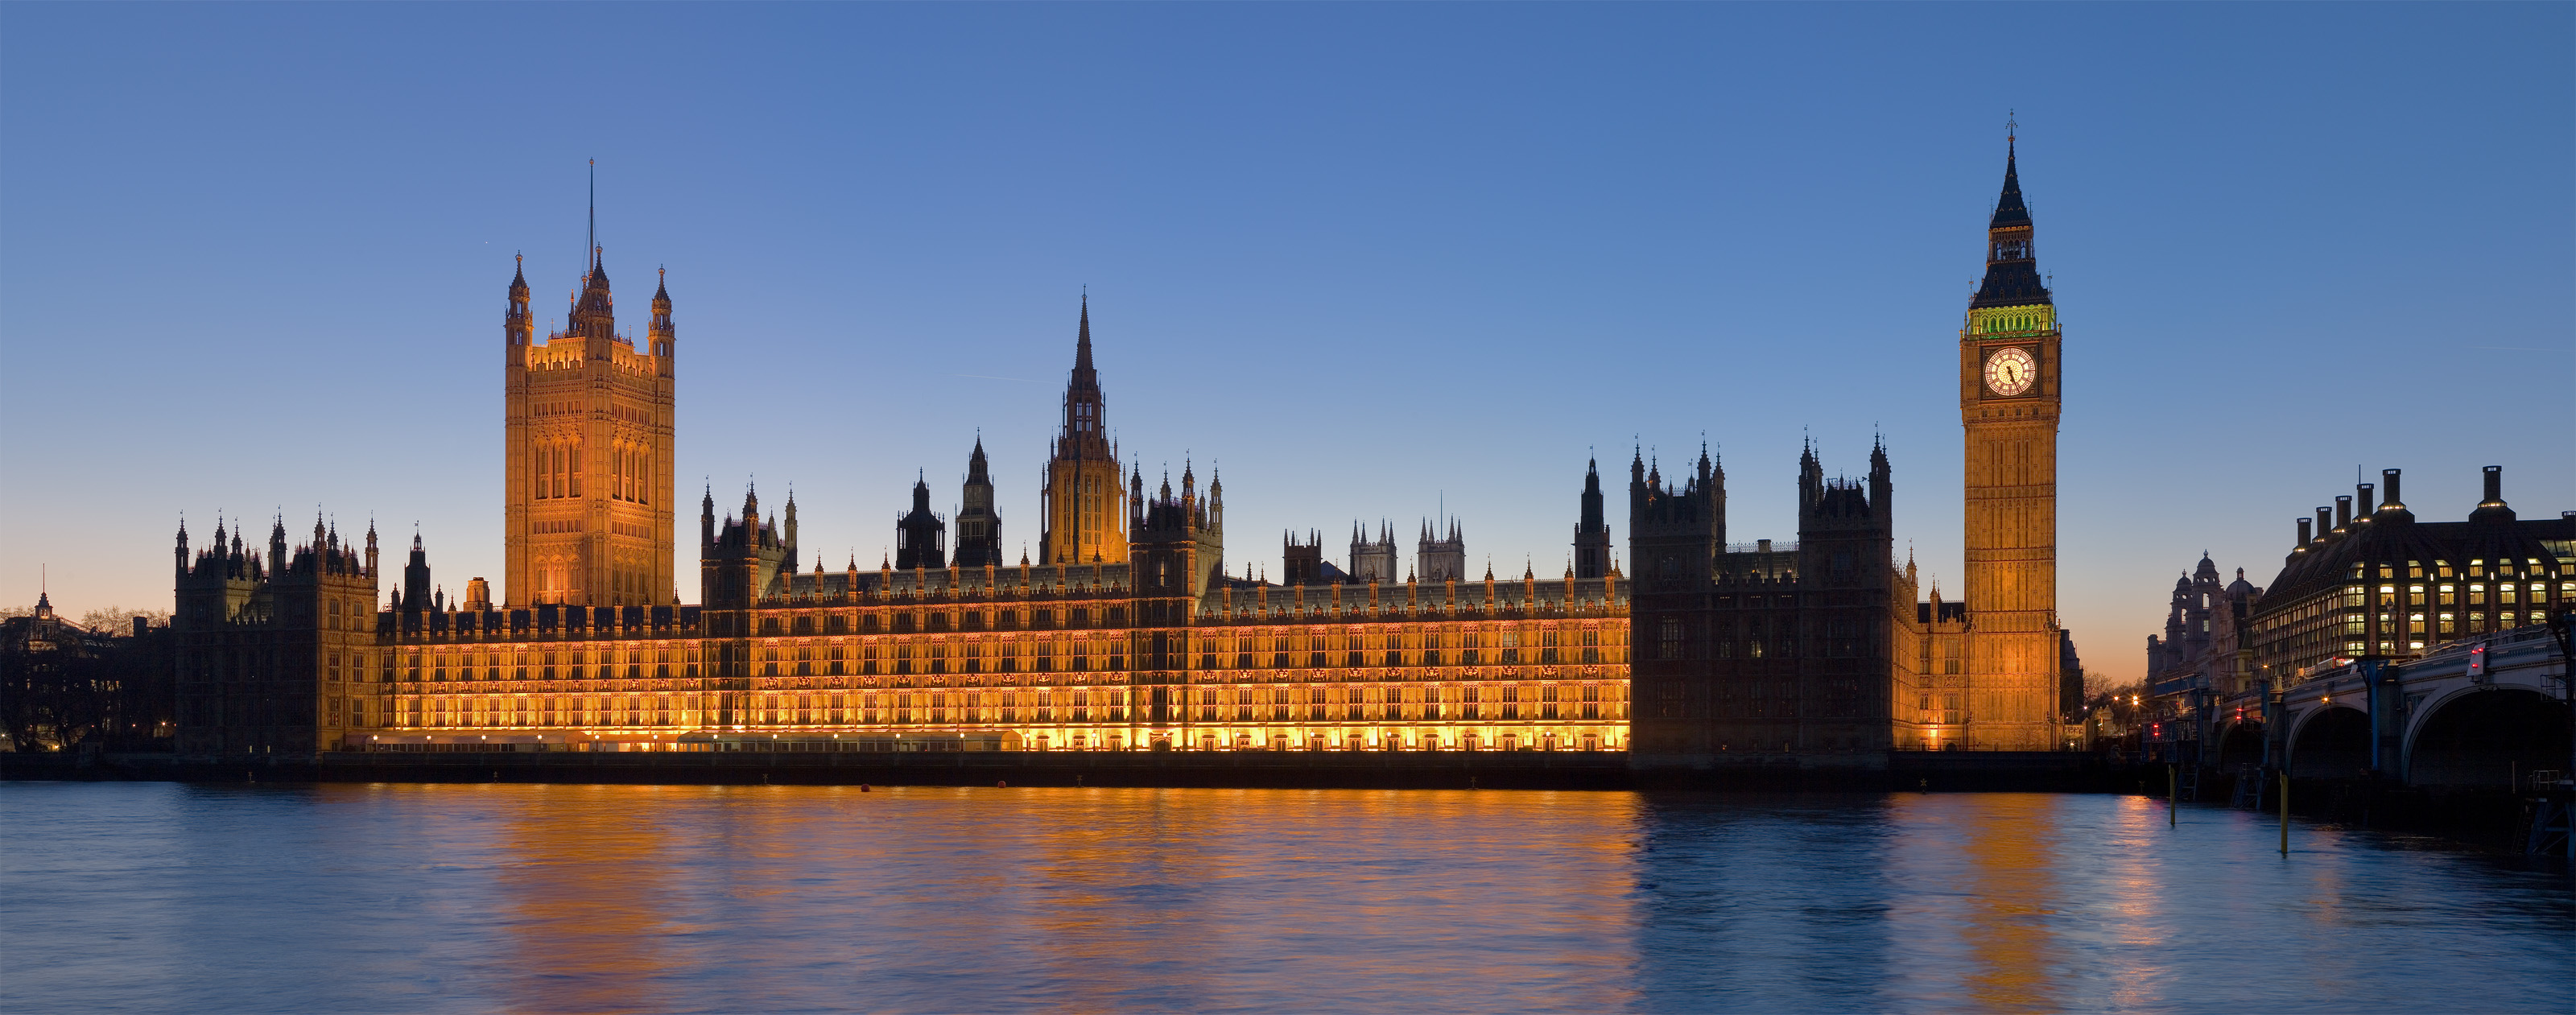 Nice Images Collection: Palace Of Westminster Desktop Wallpapers